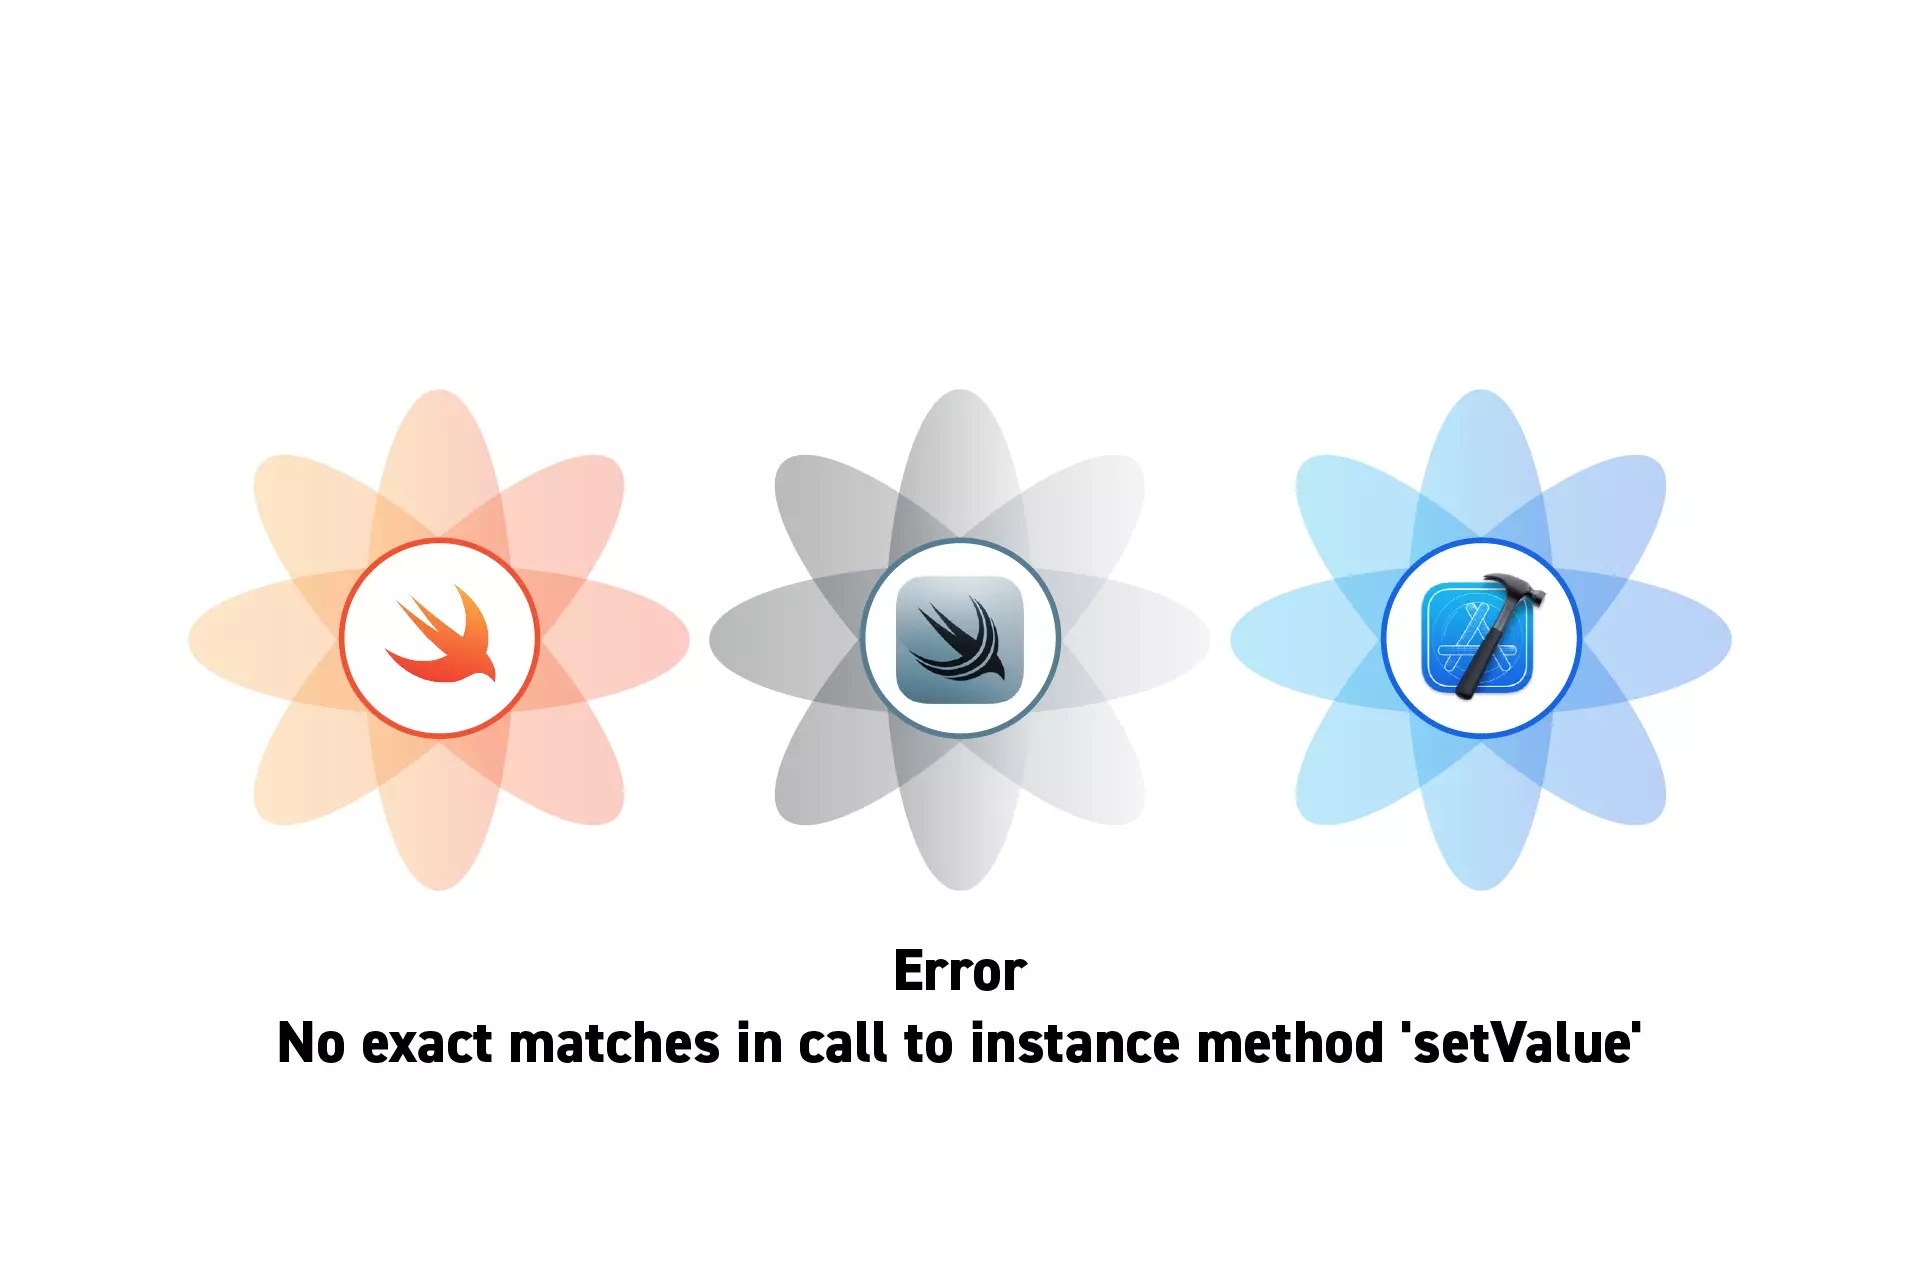 Three flowers that represent Swift, SwiftData and Xcode. Beneath them sits the text "Error No exact matches in call to instance method 'setValue'."